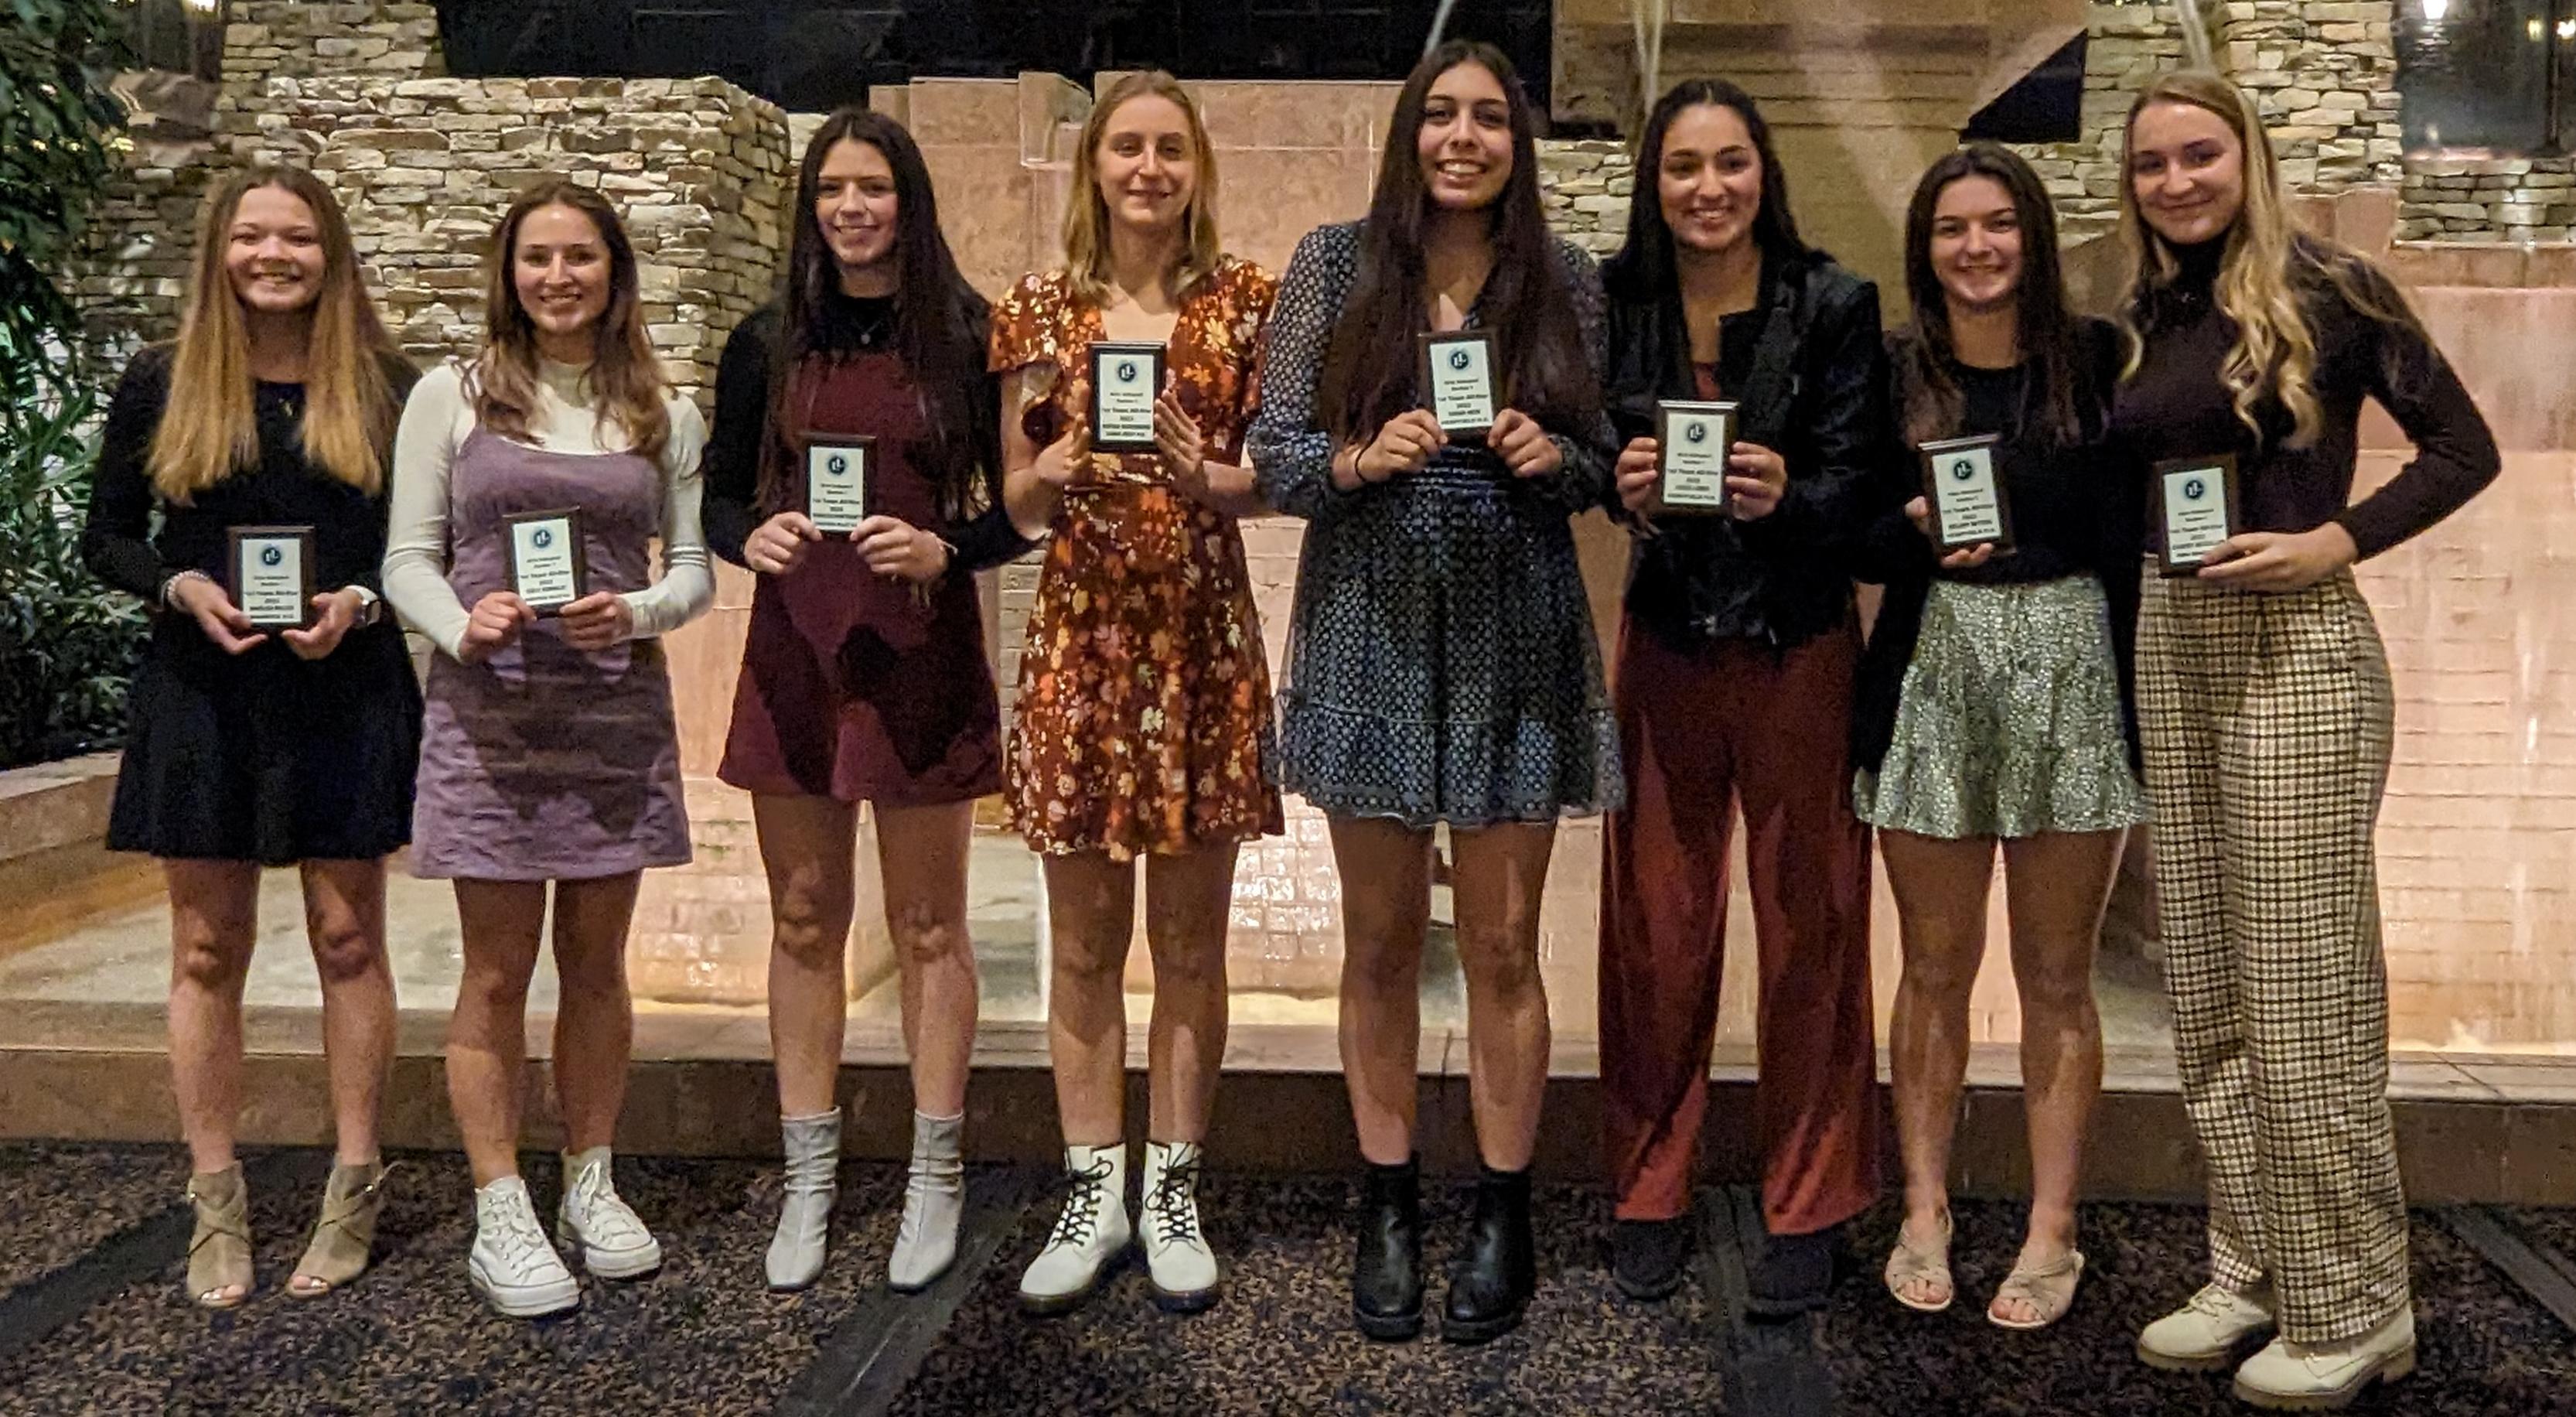 Section 1 first team